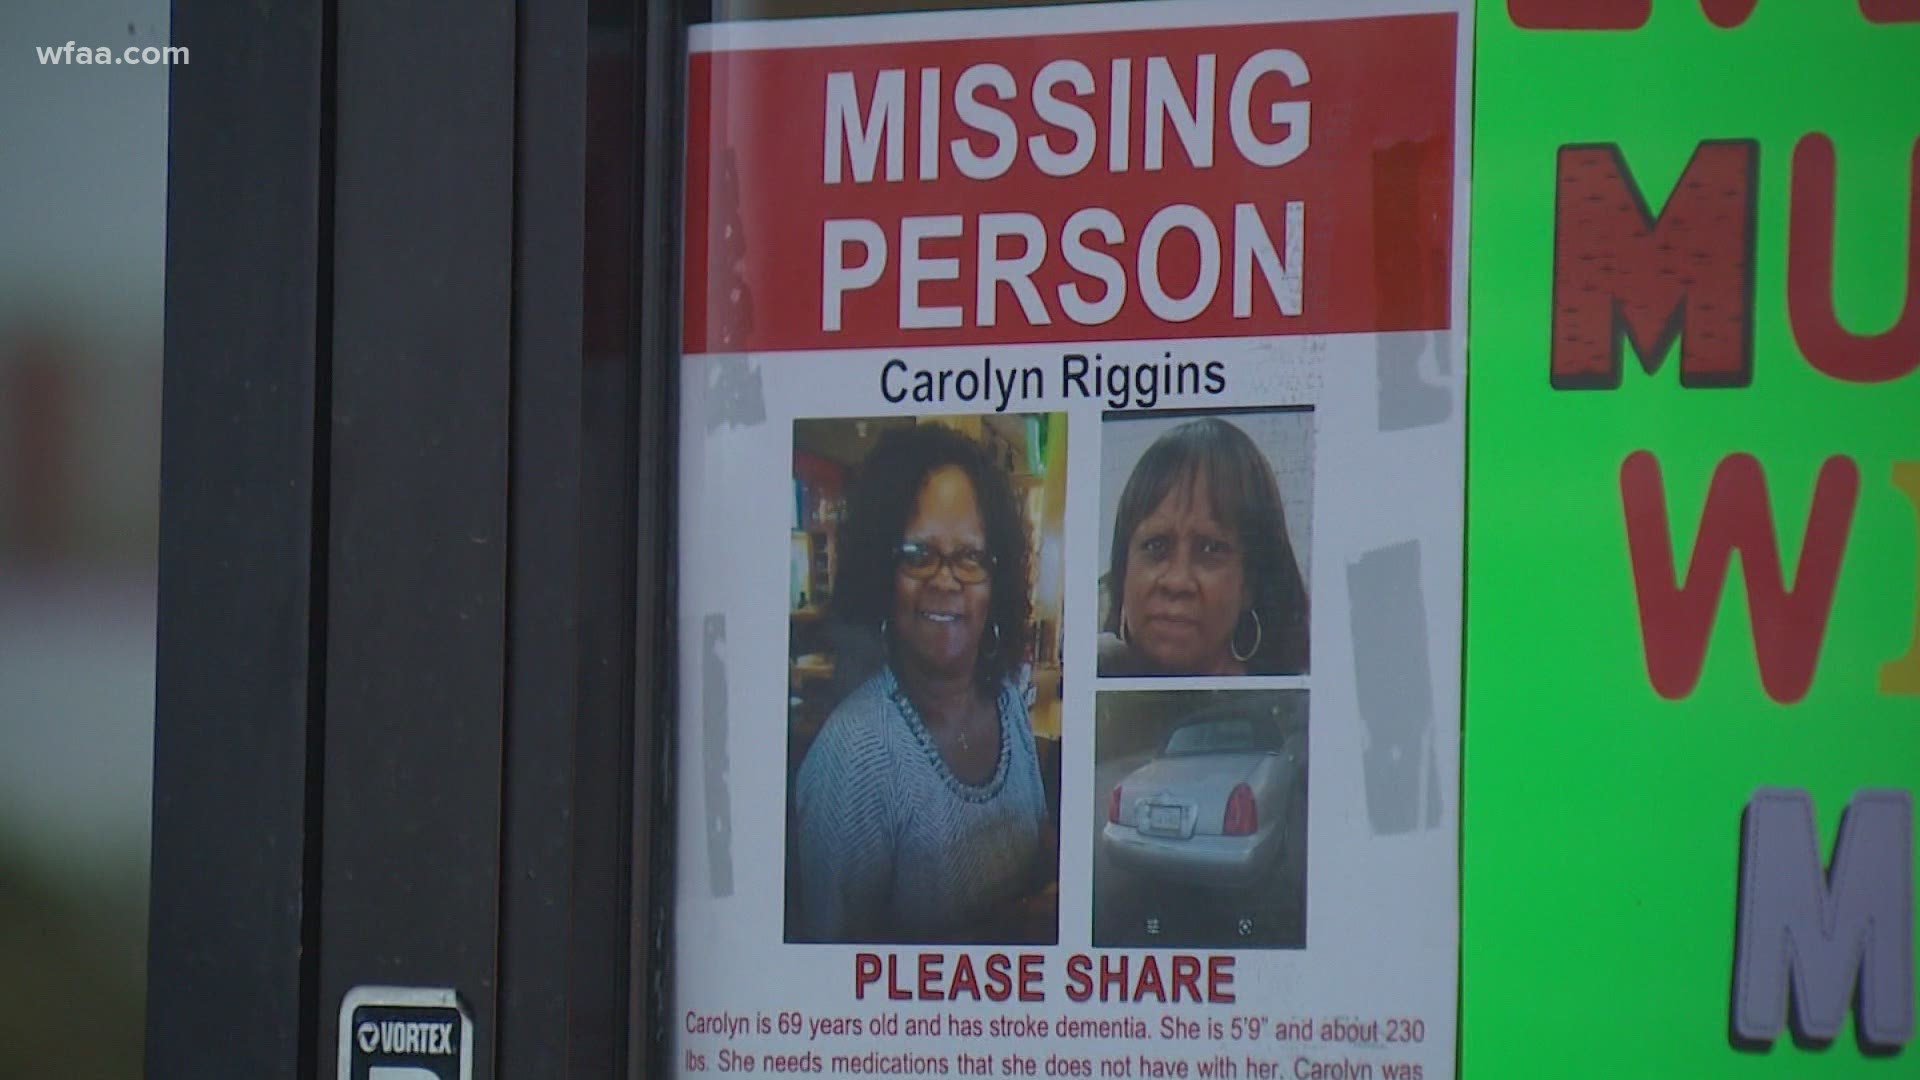 Carolyn Riggins was last seen on July 11 leaving a bingo hall after winning. Her car was found with human remains inside.